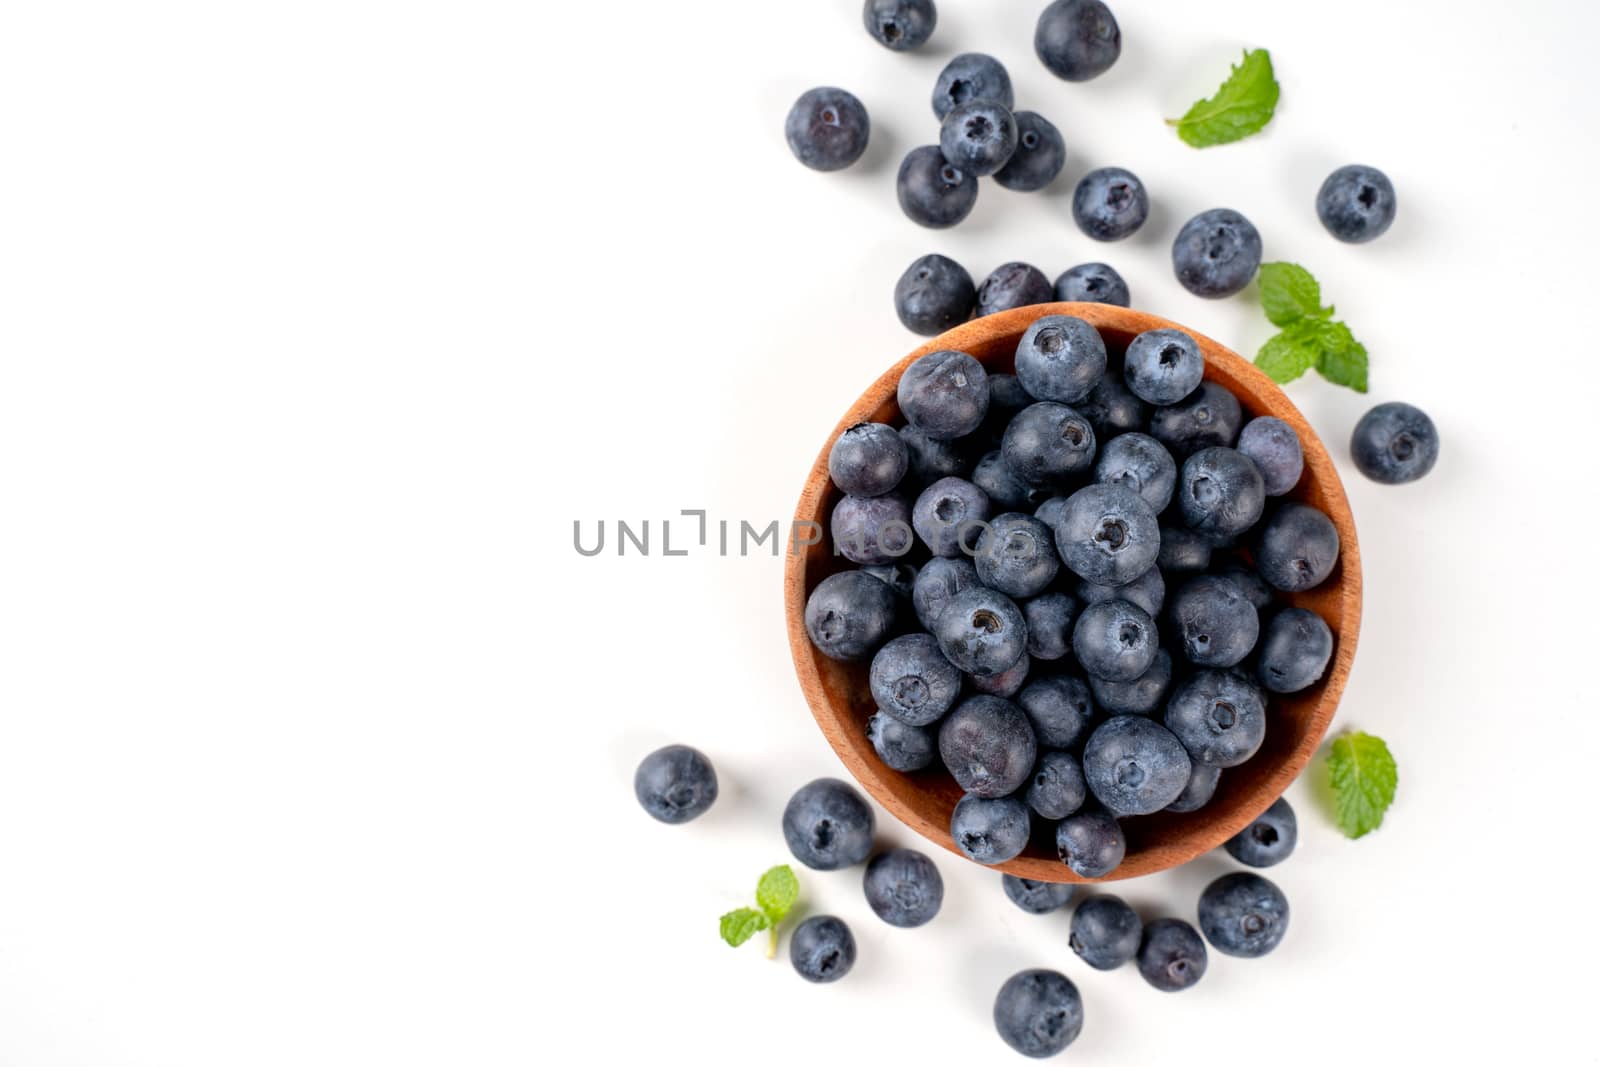 Blueberry fruit top view isolated on a white background, flat lay overhead layout with mint leaf, healthy design concept.